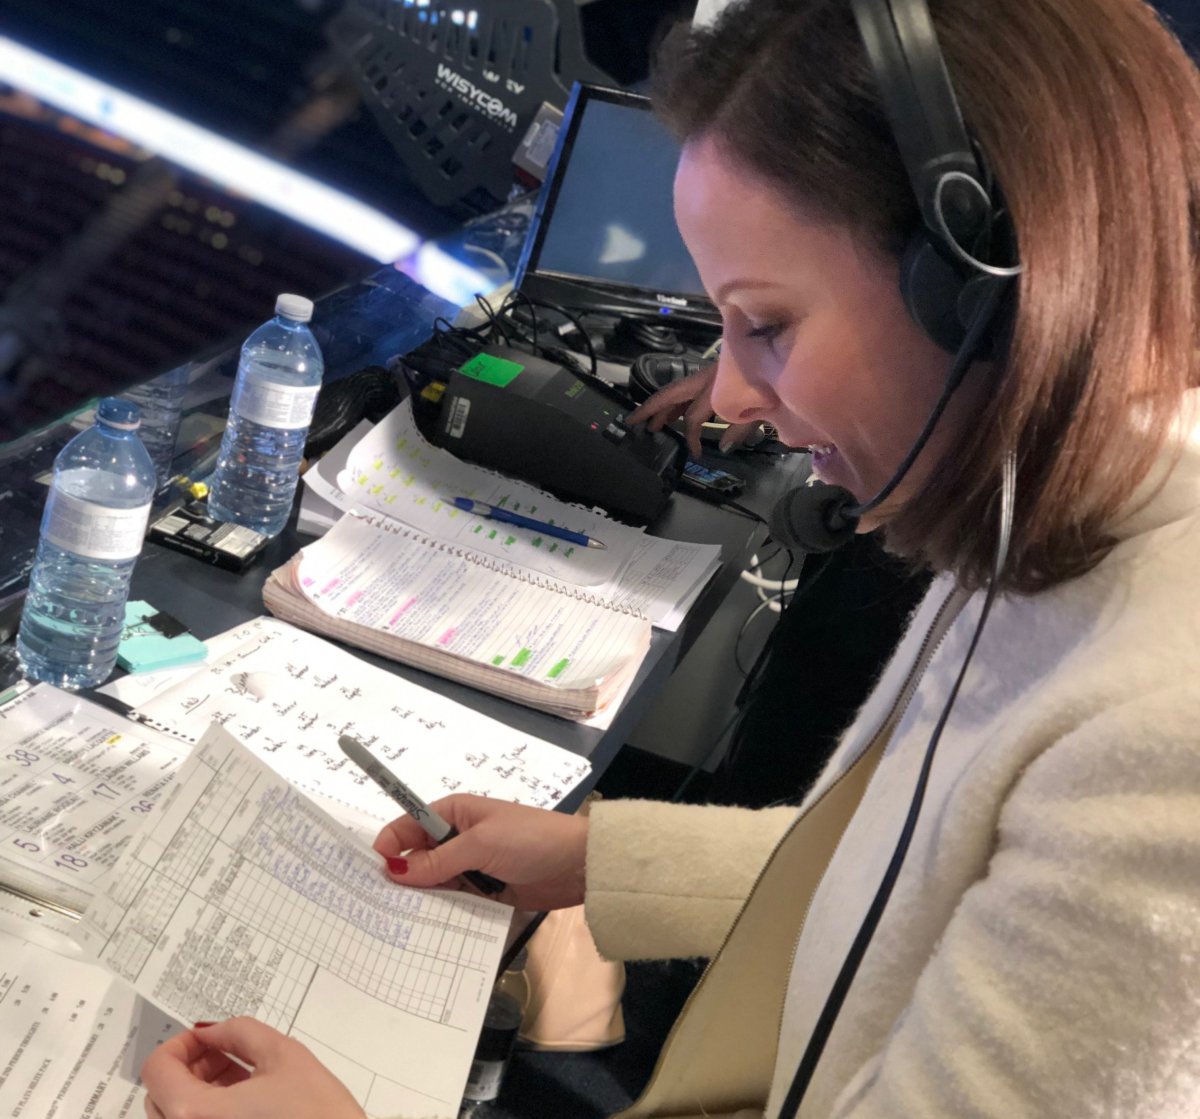 680 CJOB Hockey Analyst and Rogers Sportsnet Play by Play Broadcaster Leah Hextall recapping the scoring plays of the CWHL All Star Game at Scotiabank Arena in Toronto. Supplied Photo .